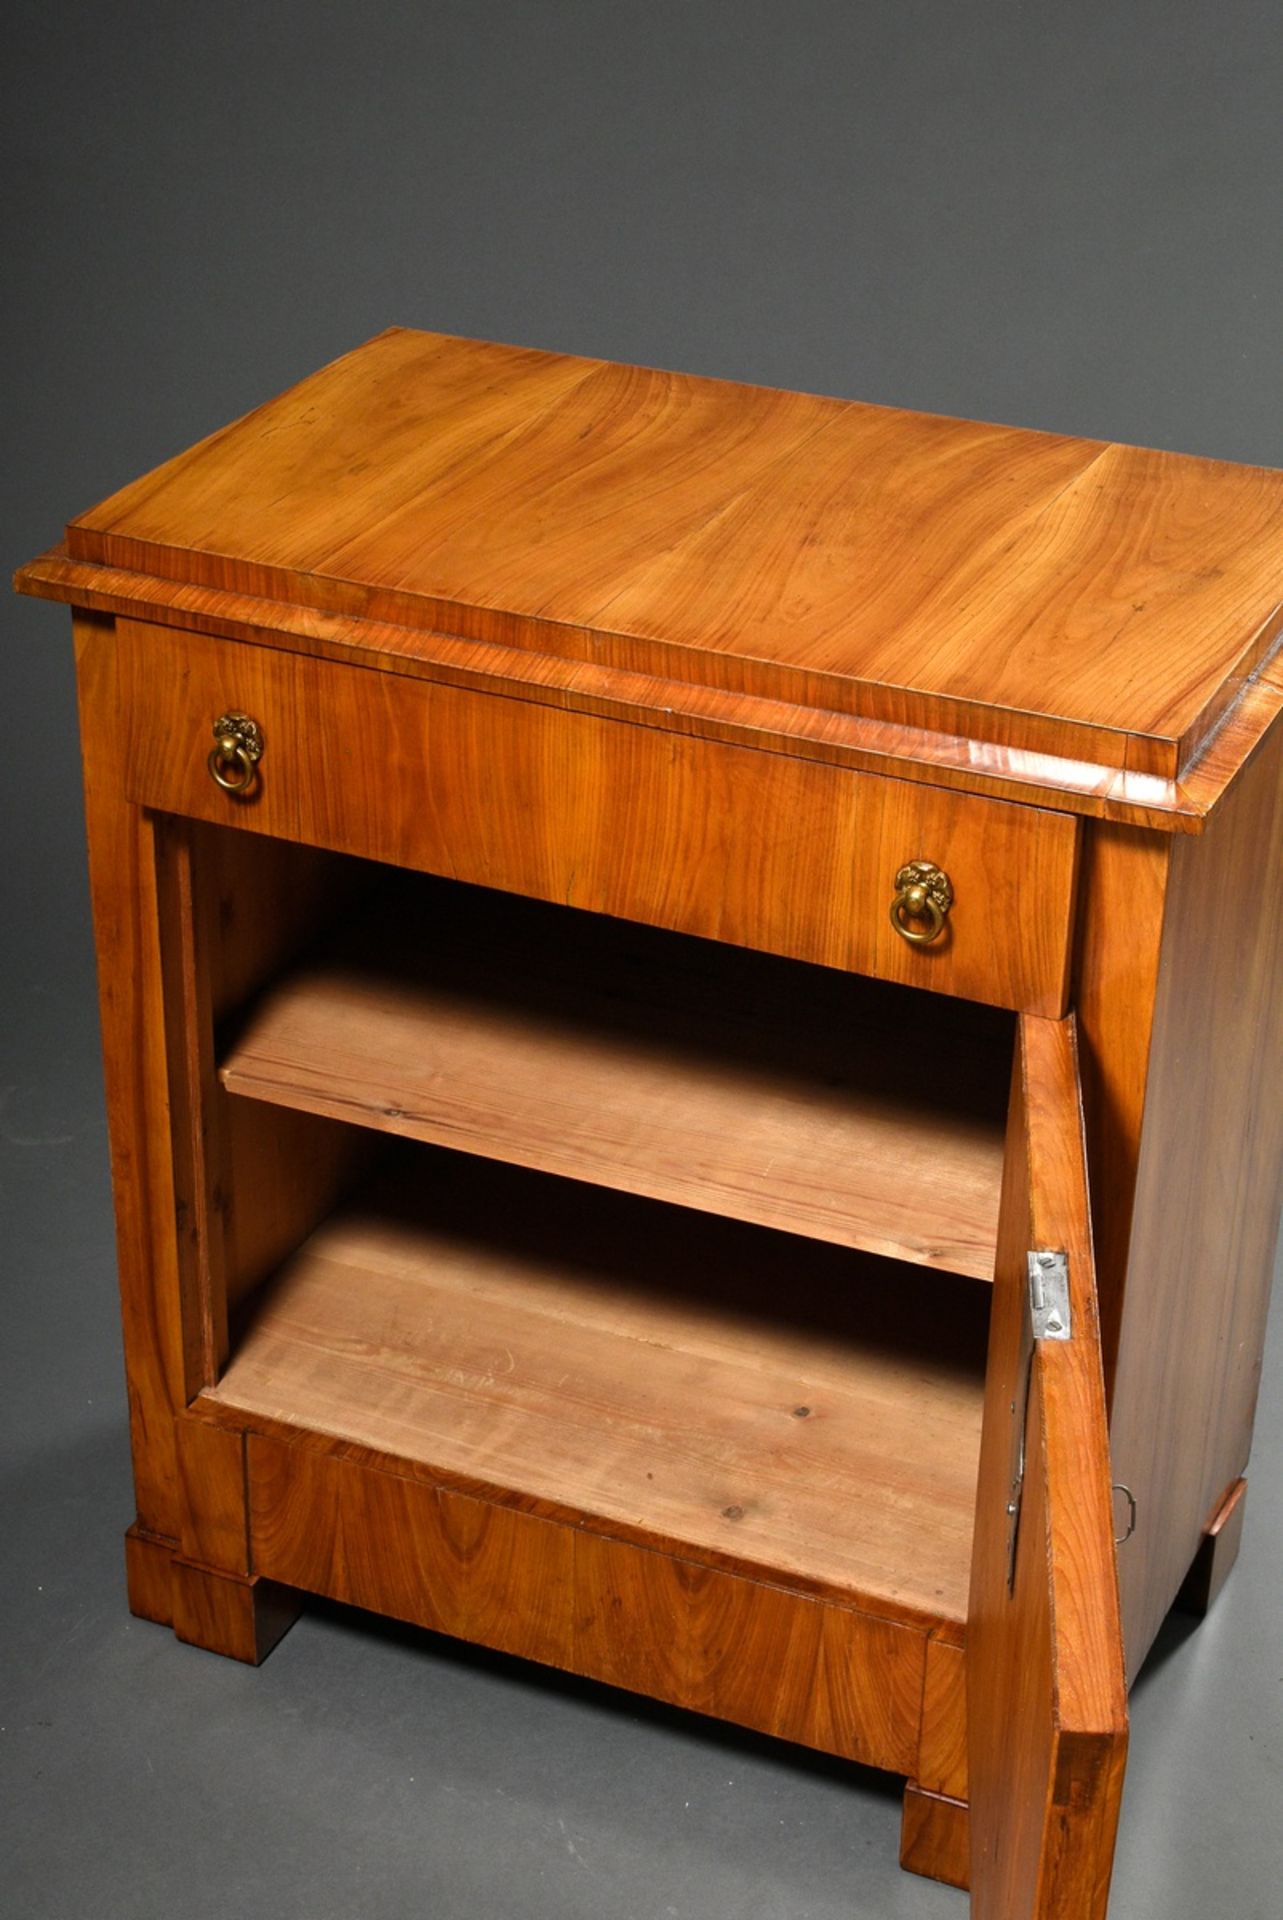 Small console dresser with segmental arch in the door, cherry/softwood veneer, 1st quarter 19th c., - Image 4 of 6